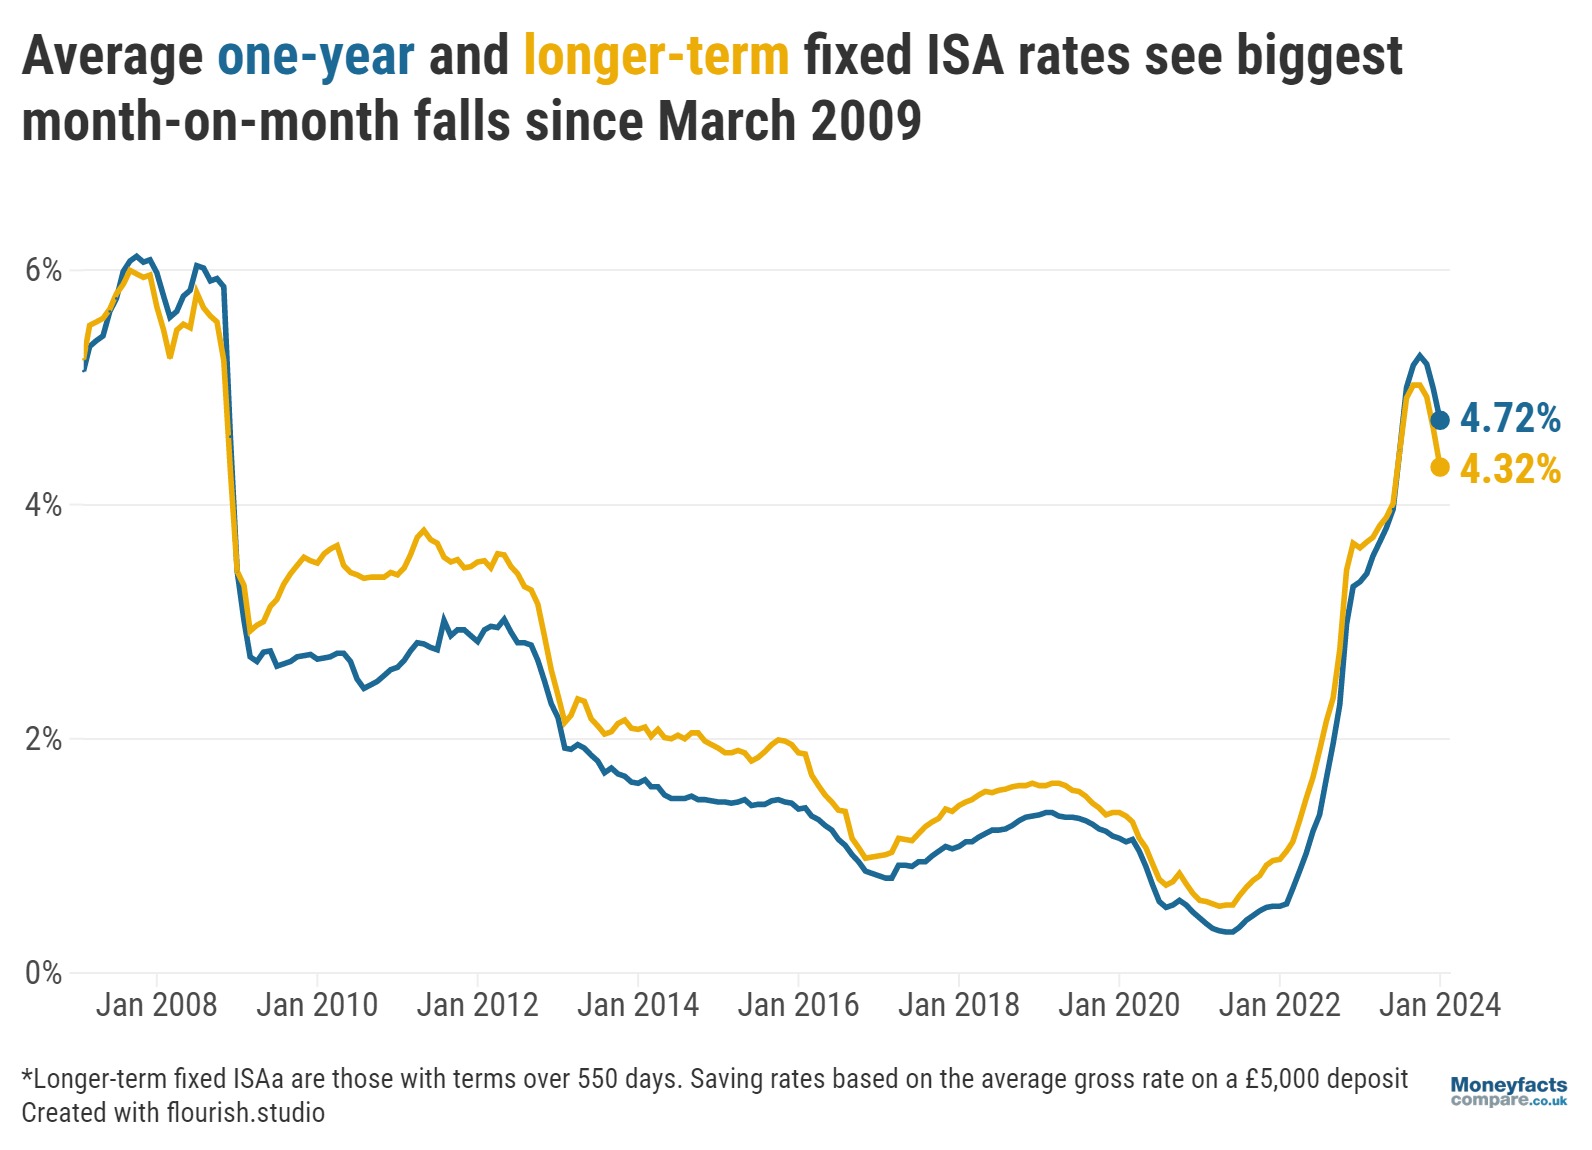 Graph showing average one-year and longer-term fixed ISA rates